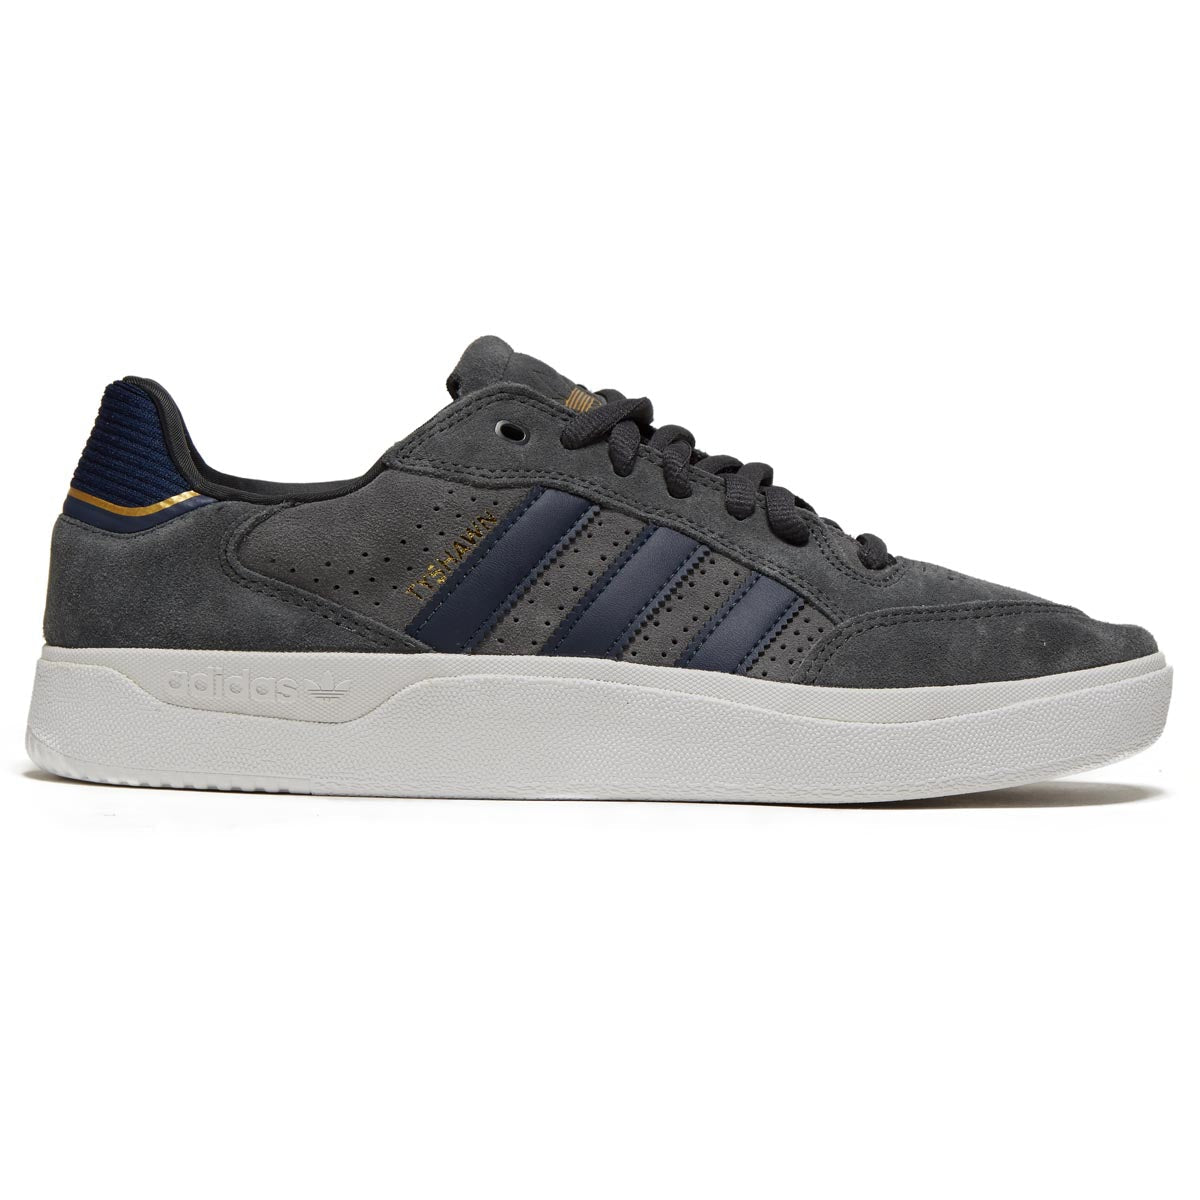 Adidas Tyshawn Low Shoes - Carbon/Carbon/Grey image 1